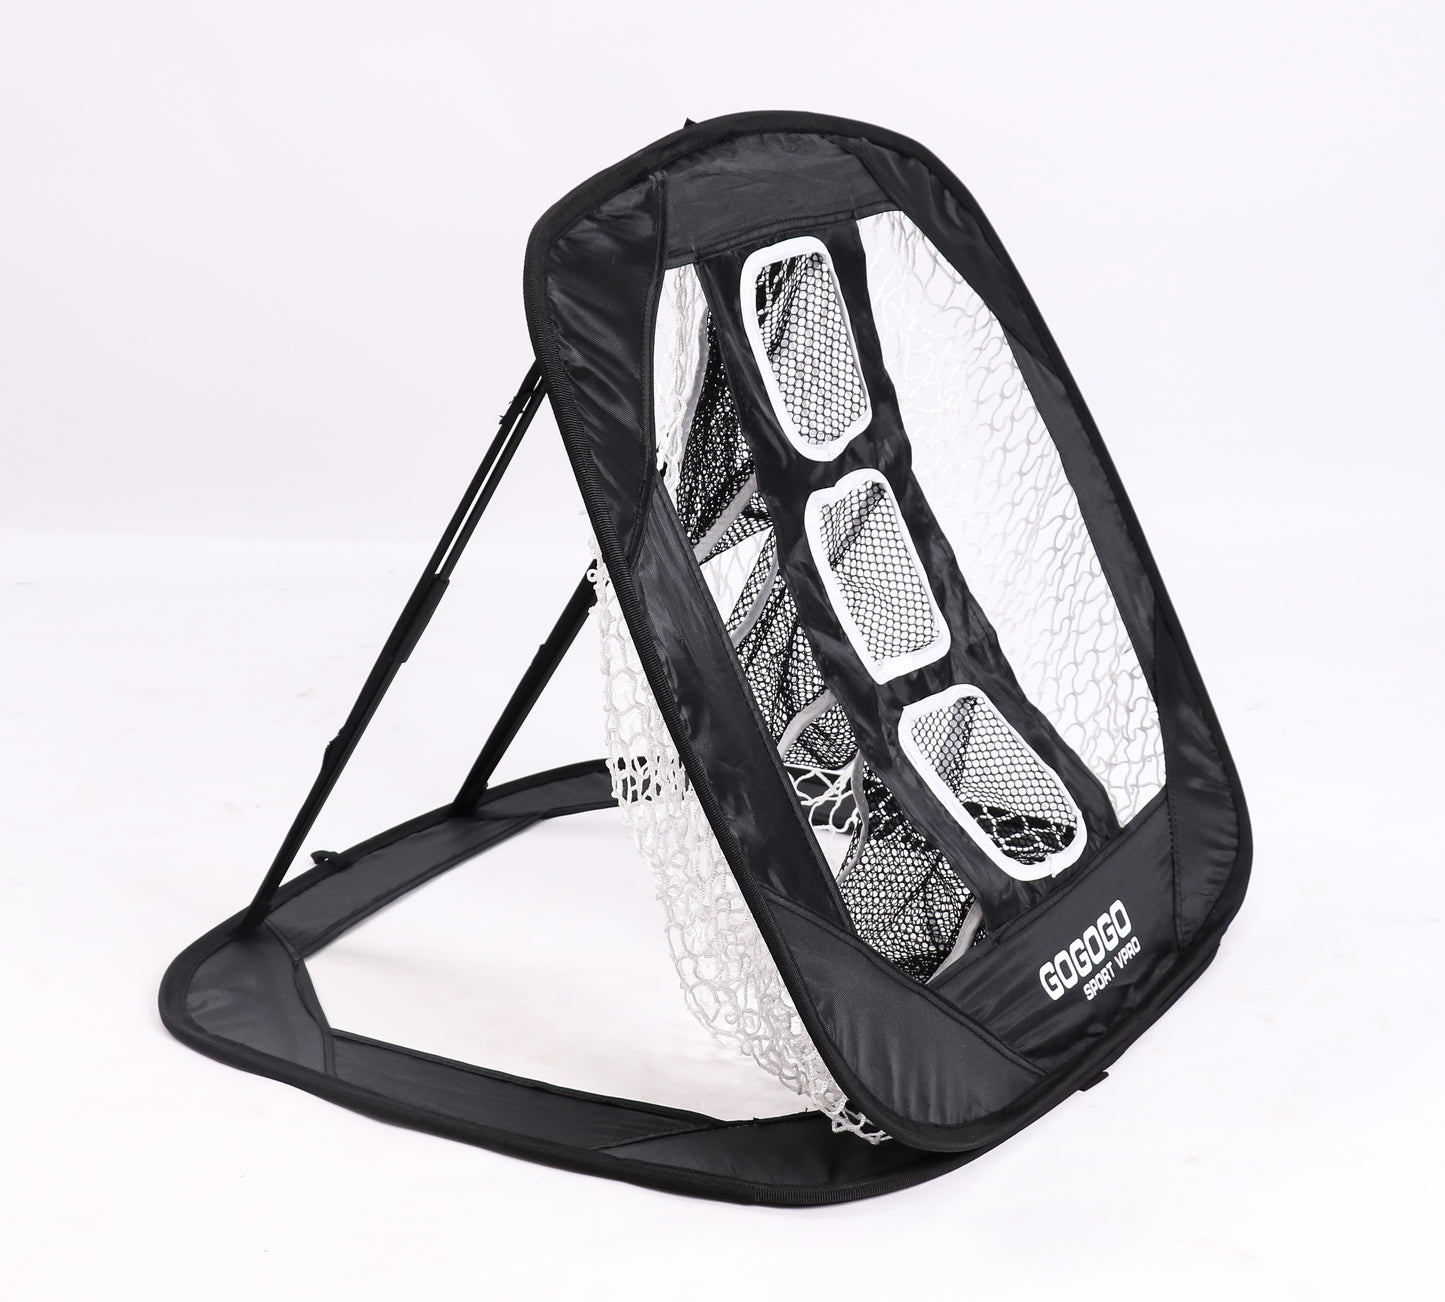 Gogogo Sport Vpro Pop-Up Golf Chipping Net, Collapsible Stable Durable Golf Net for Outdoor/Indoor Golf Swing Practice